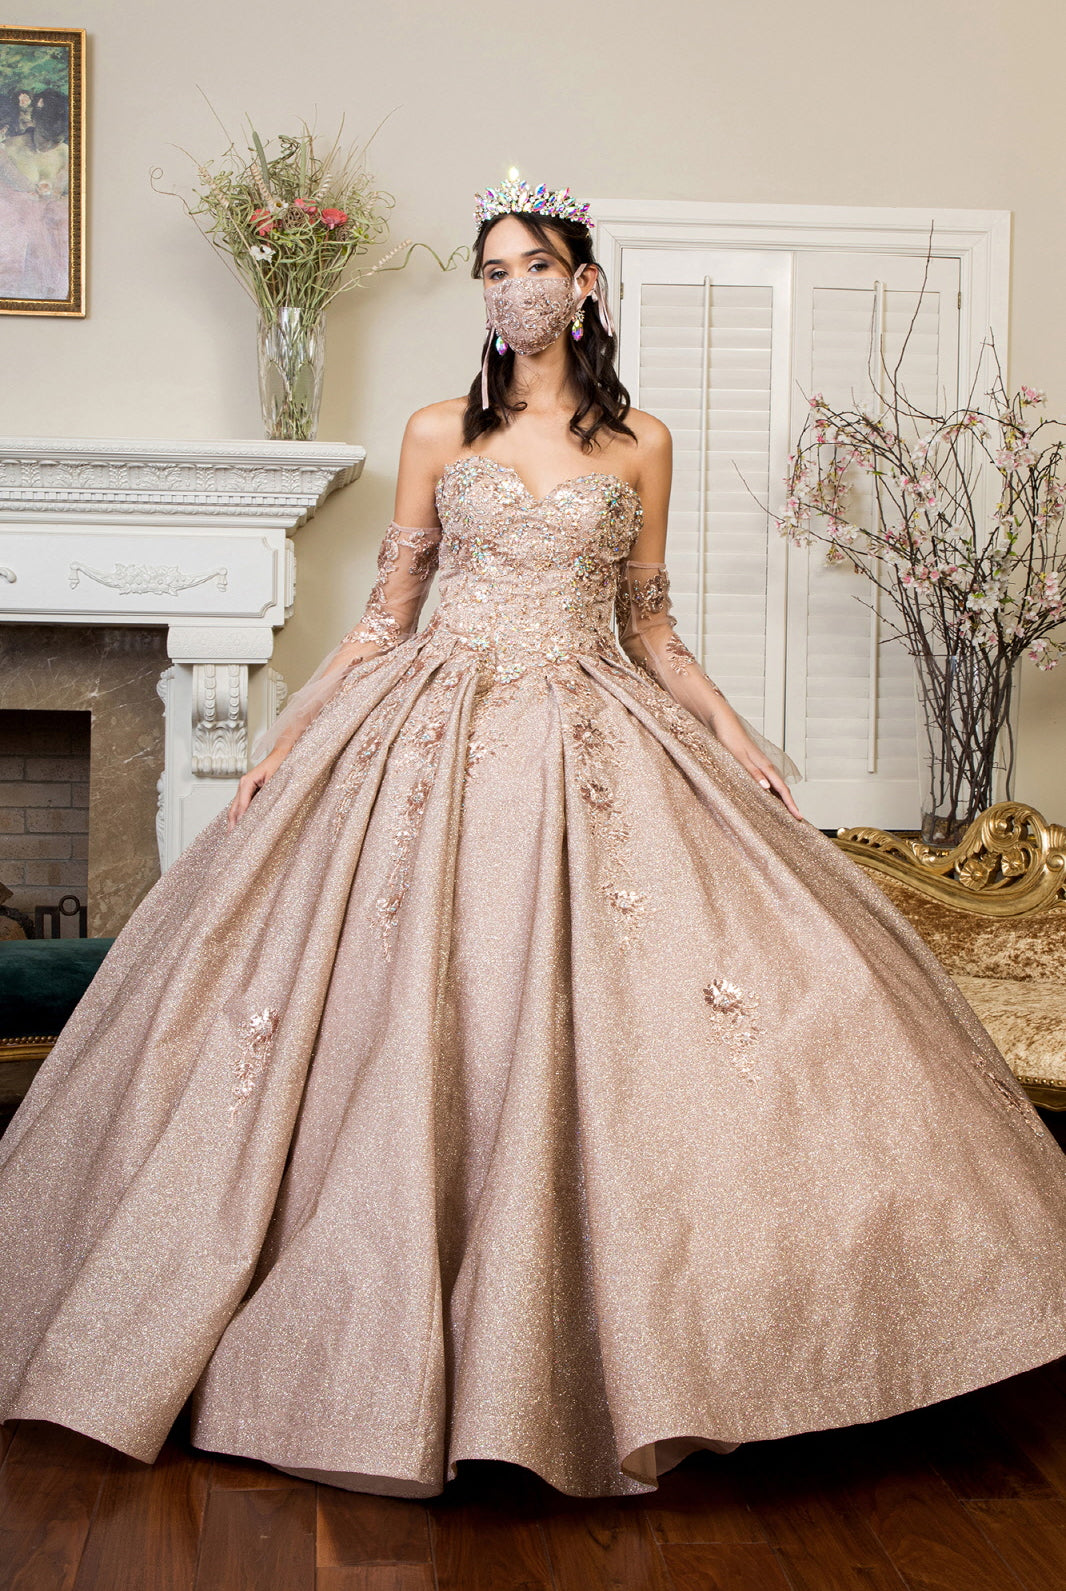 Ruffle Tail Quinceanera Dress w/ Detached Mesh Sleeve - No Mask-smcdress